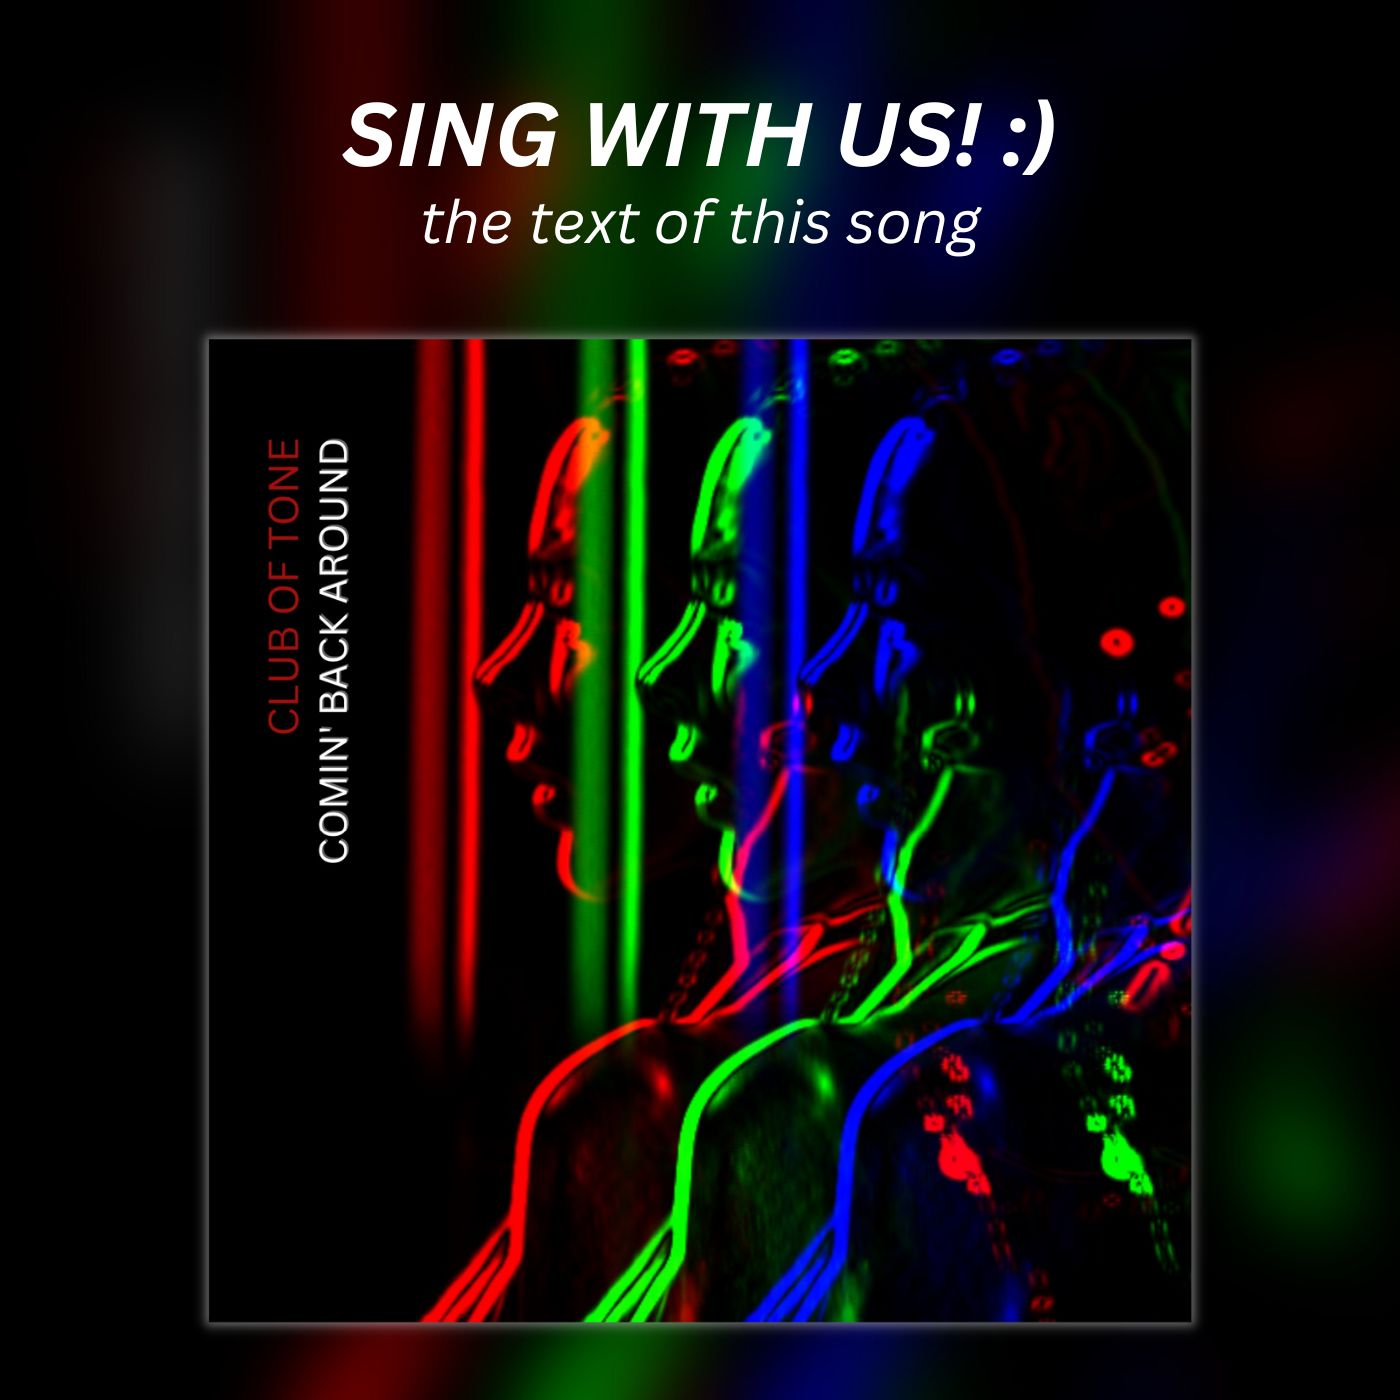 Sing with us: COMIN BACK AROUND by Club of Tone